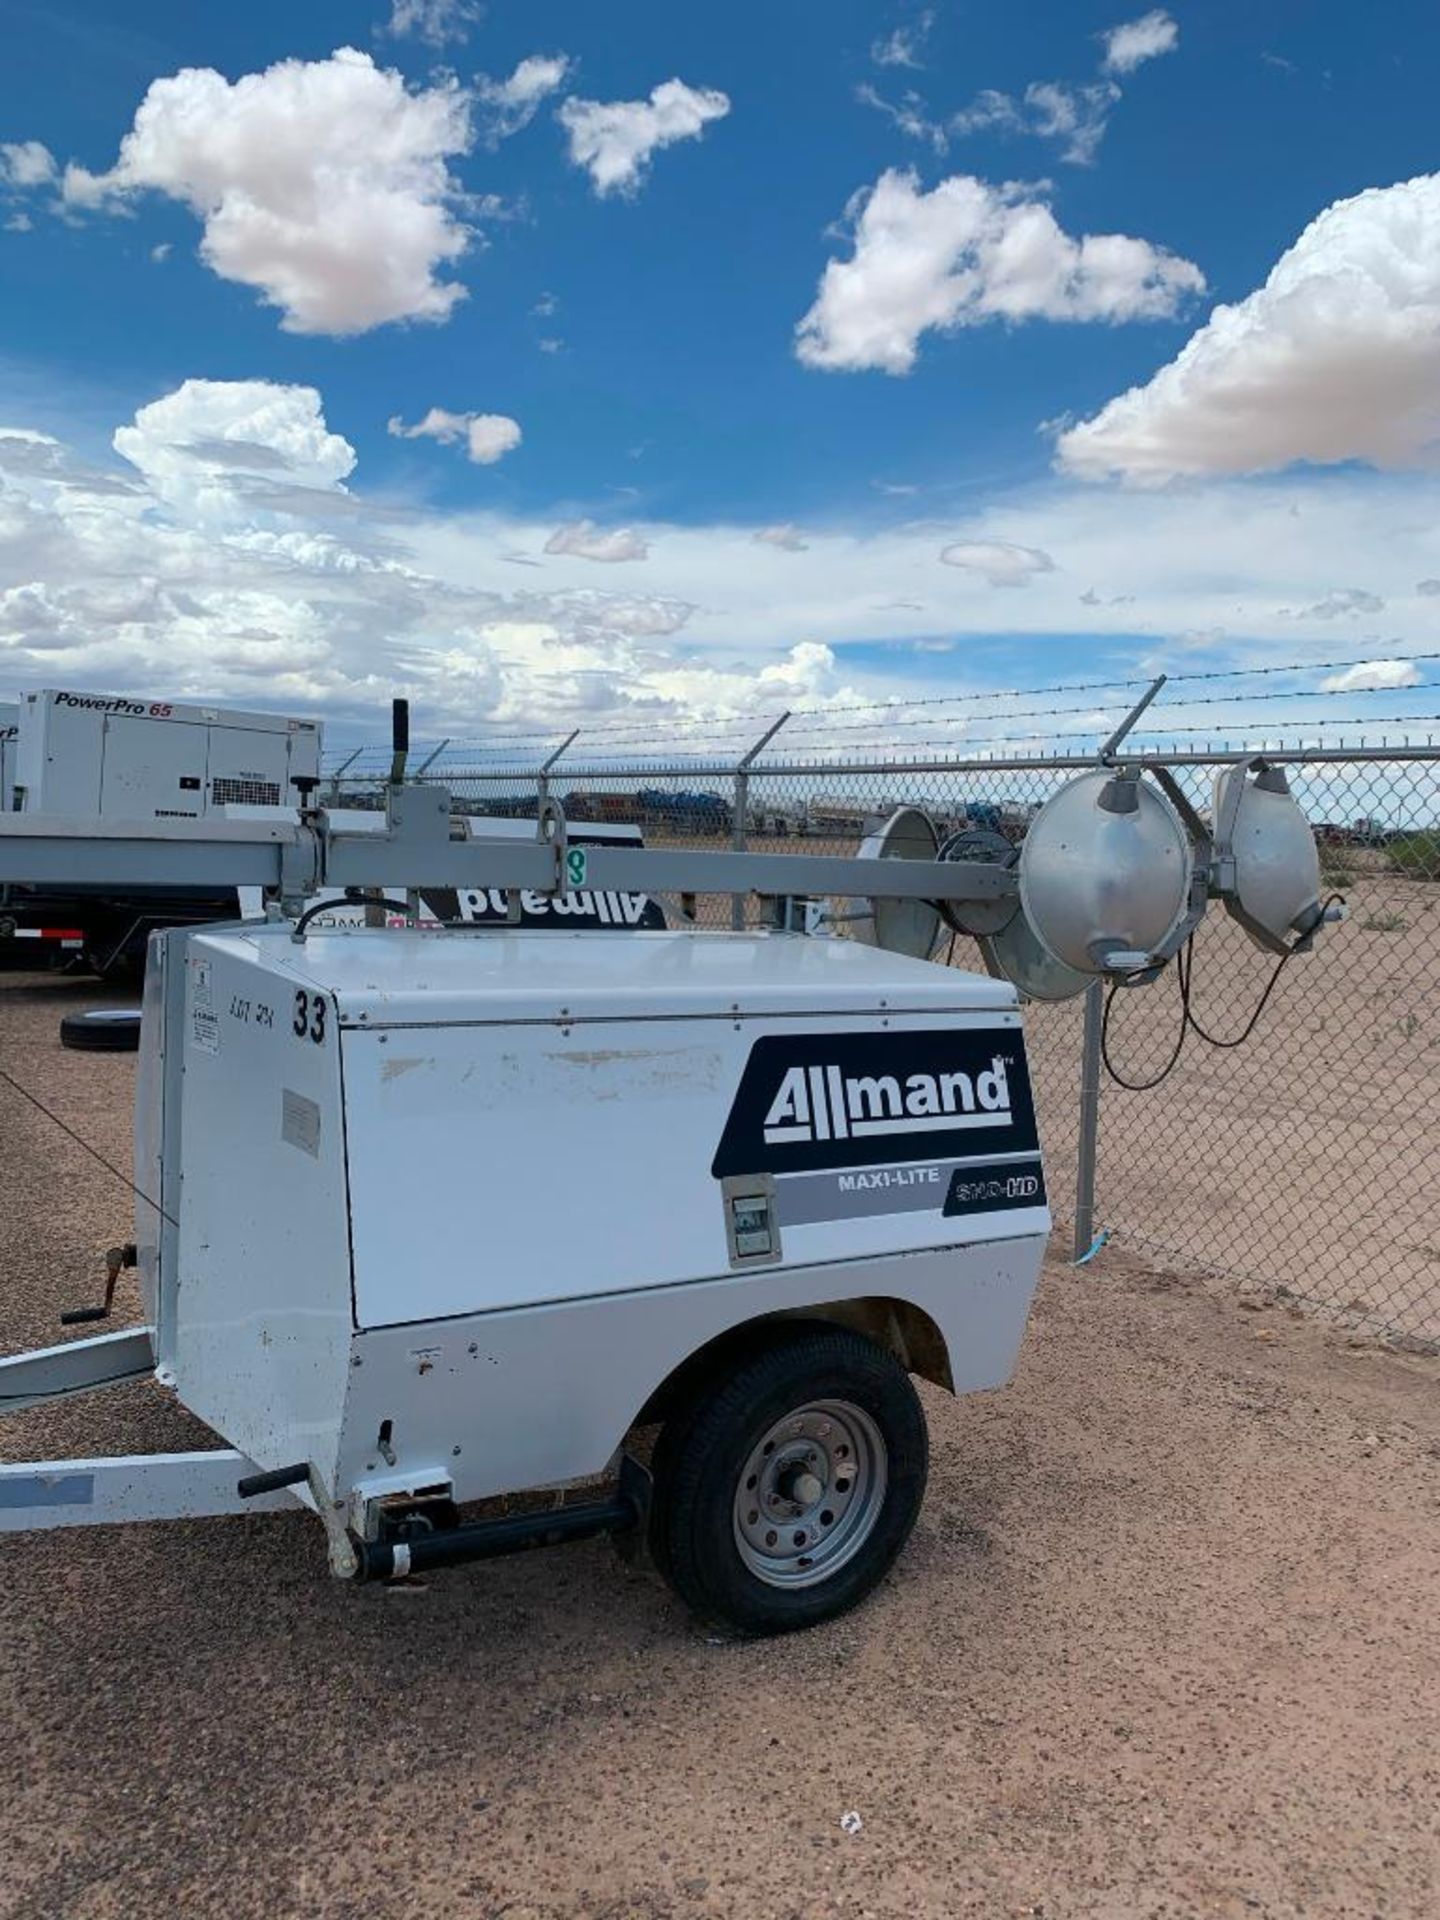 2011 ALLMAND 20 KW TOWABLE LIGHT TOWER, UNIT# LT-0211MXL12, 14,041 HOURS INDICATED ON METER (NOT GUA - Image 3 of 6